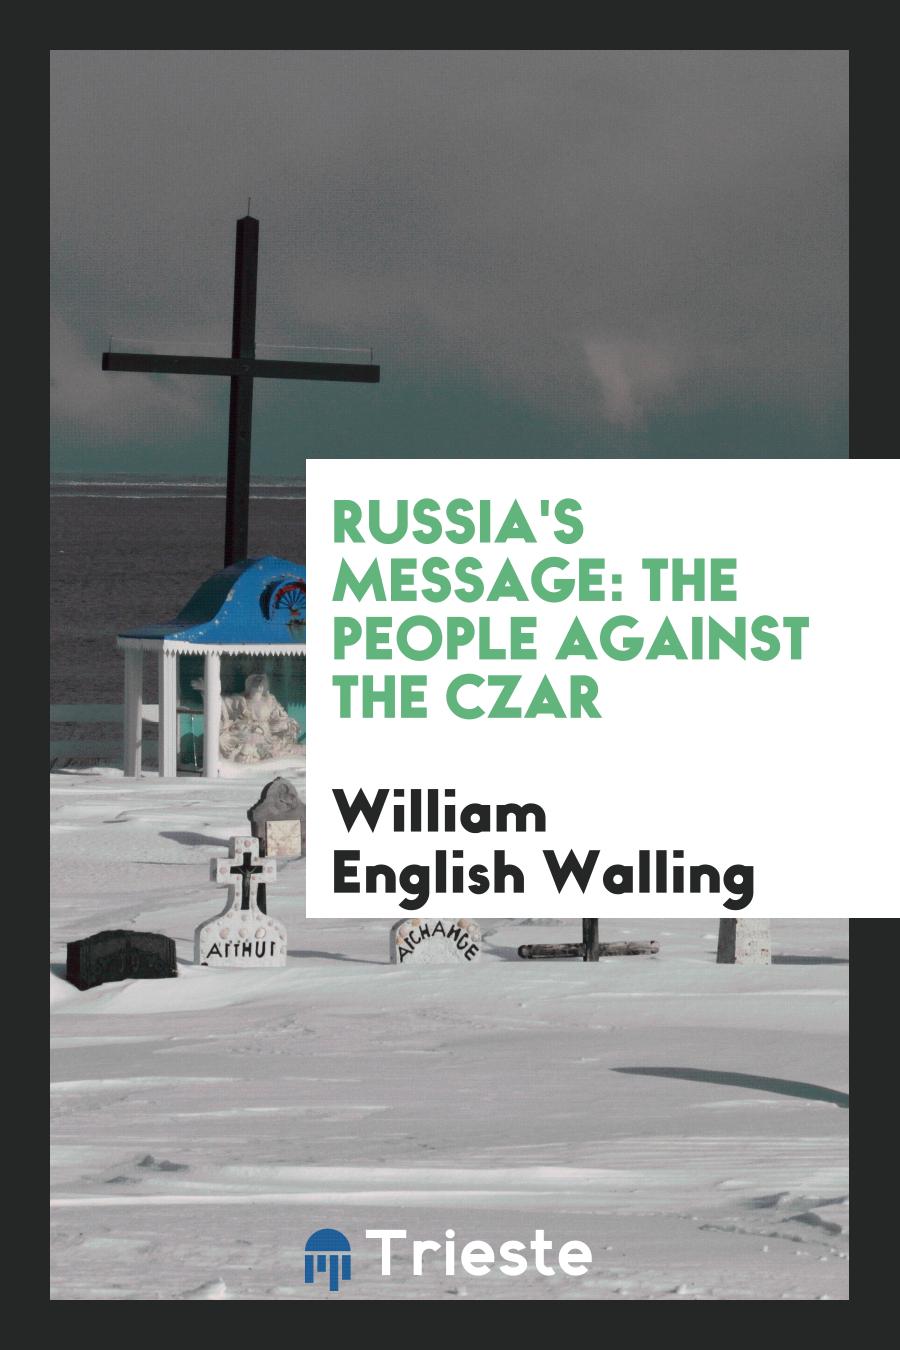 Russia's message: the people against the Czar